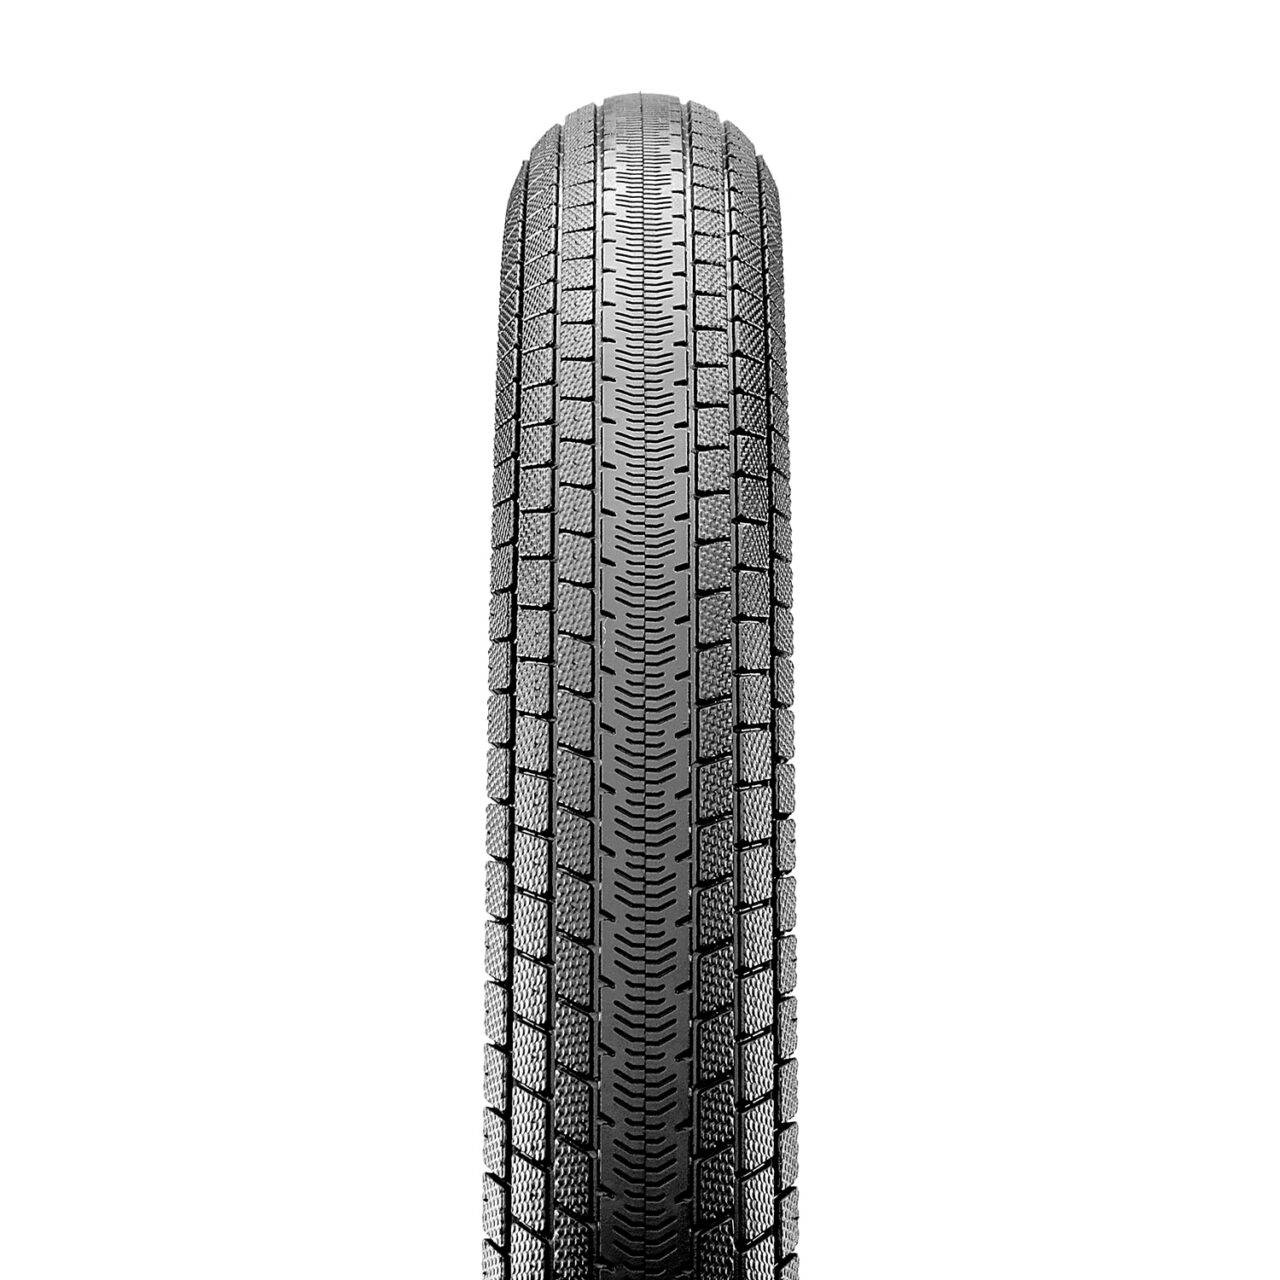 Maxxis Torch bicycle tire tread